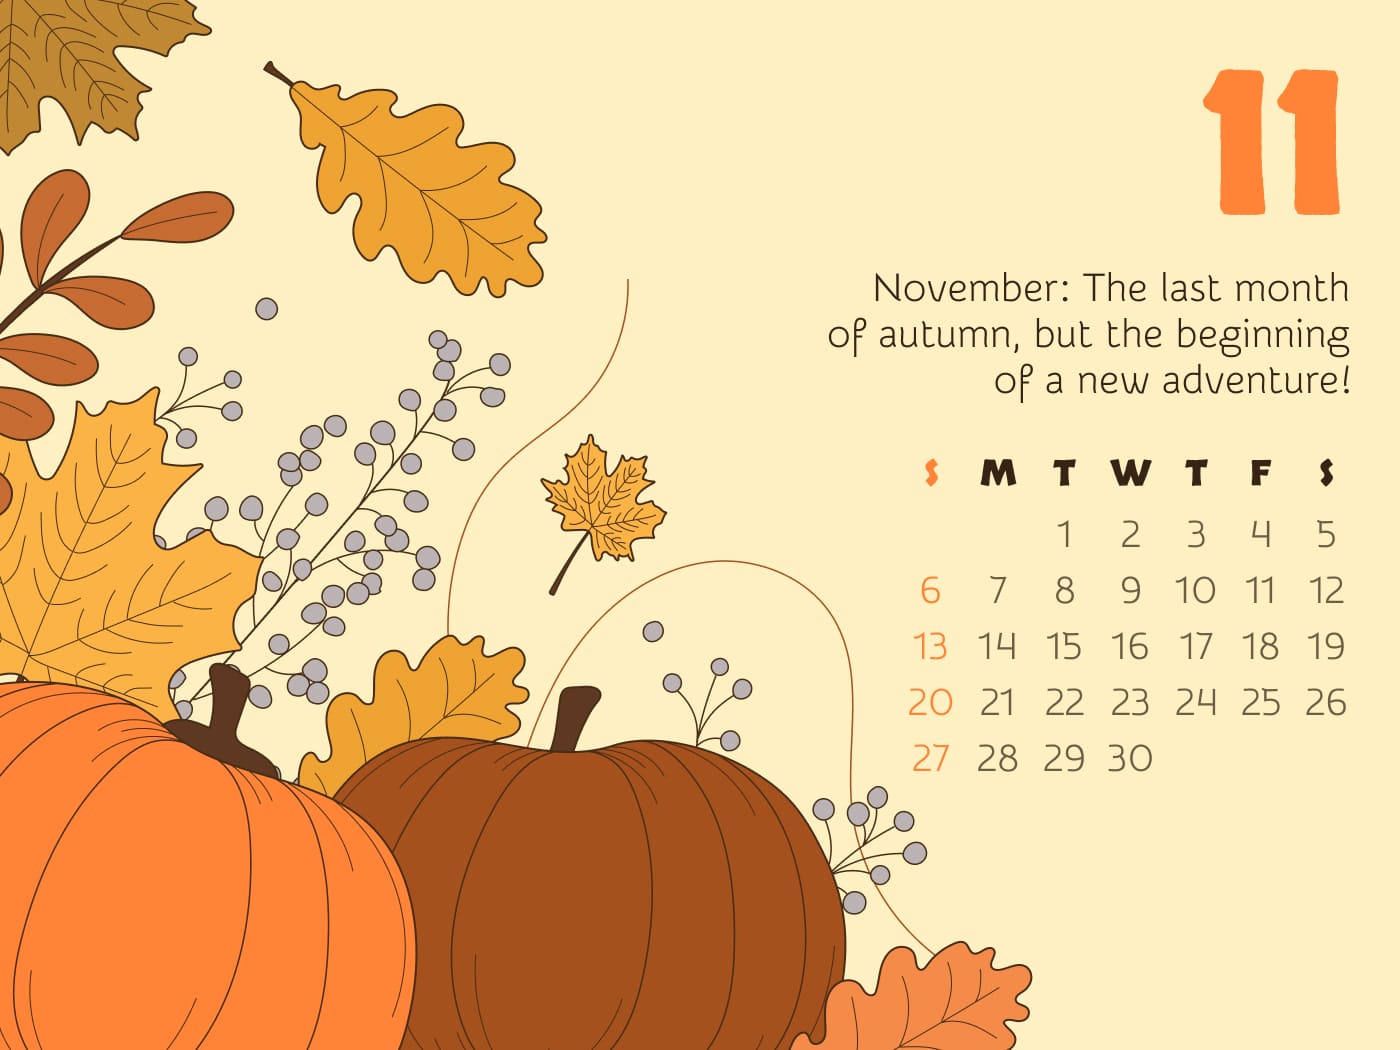 Calendar November in the picture size 1400x1050.